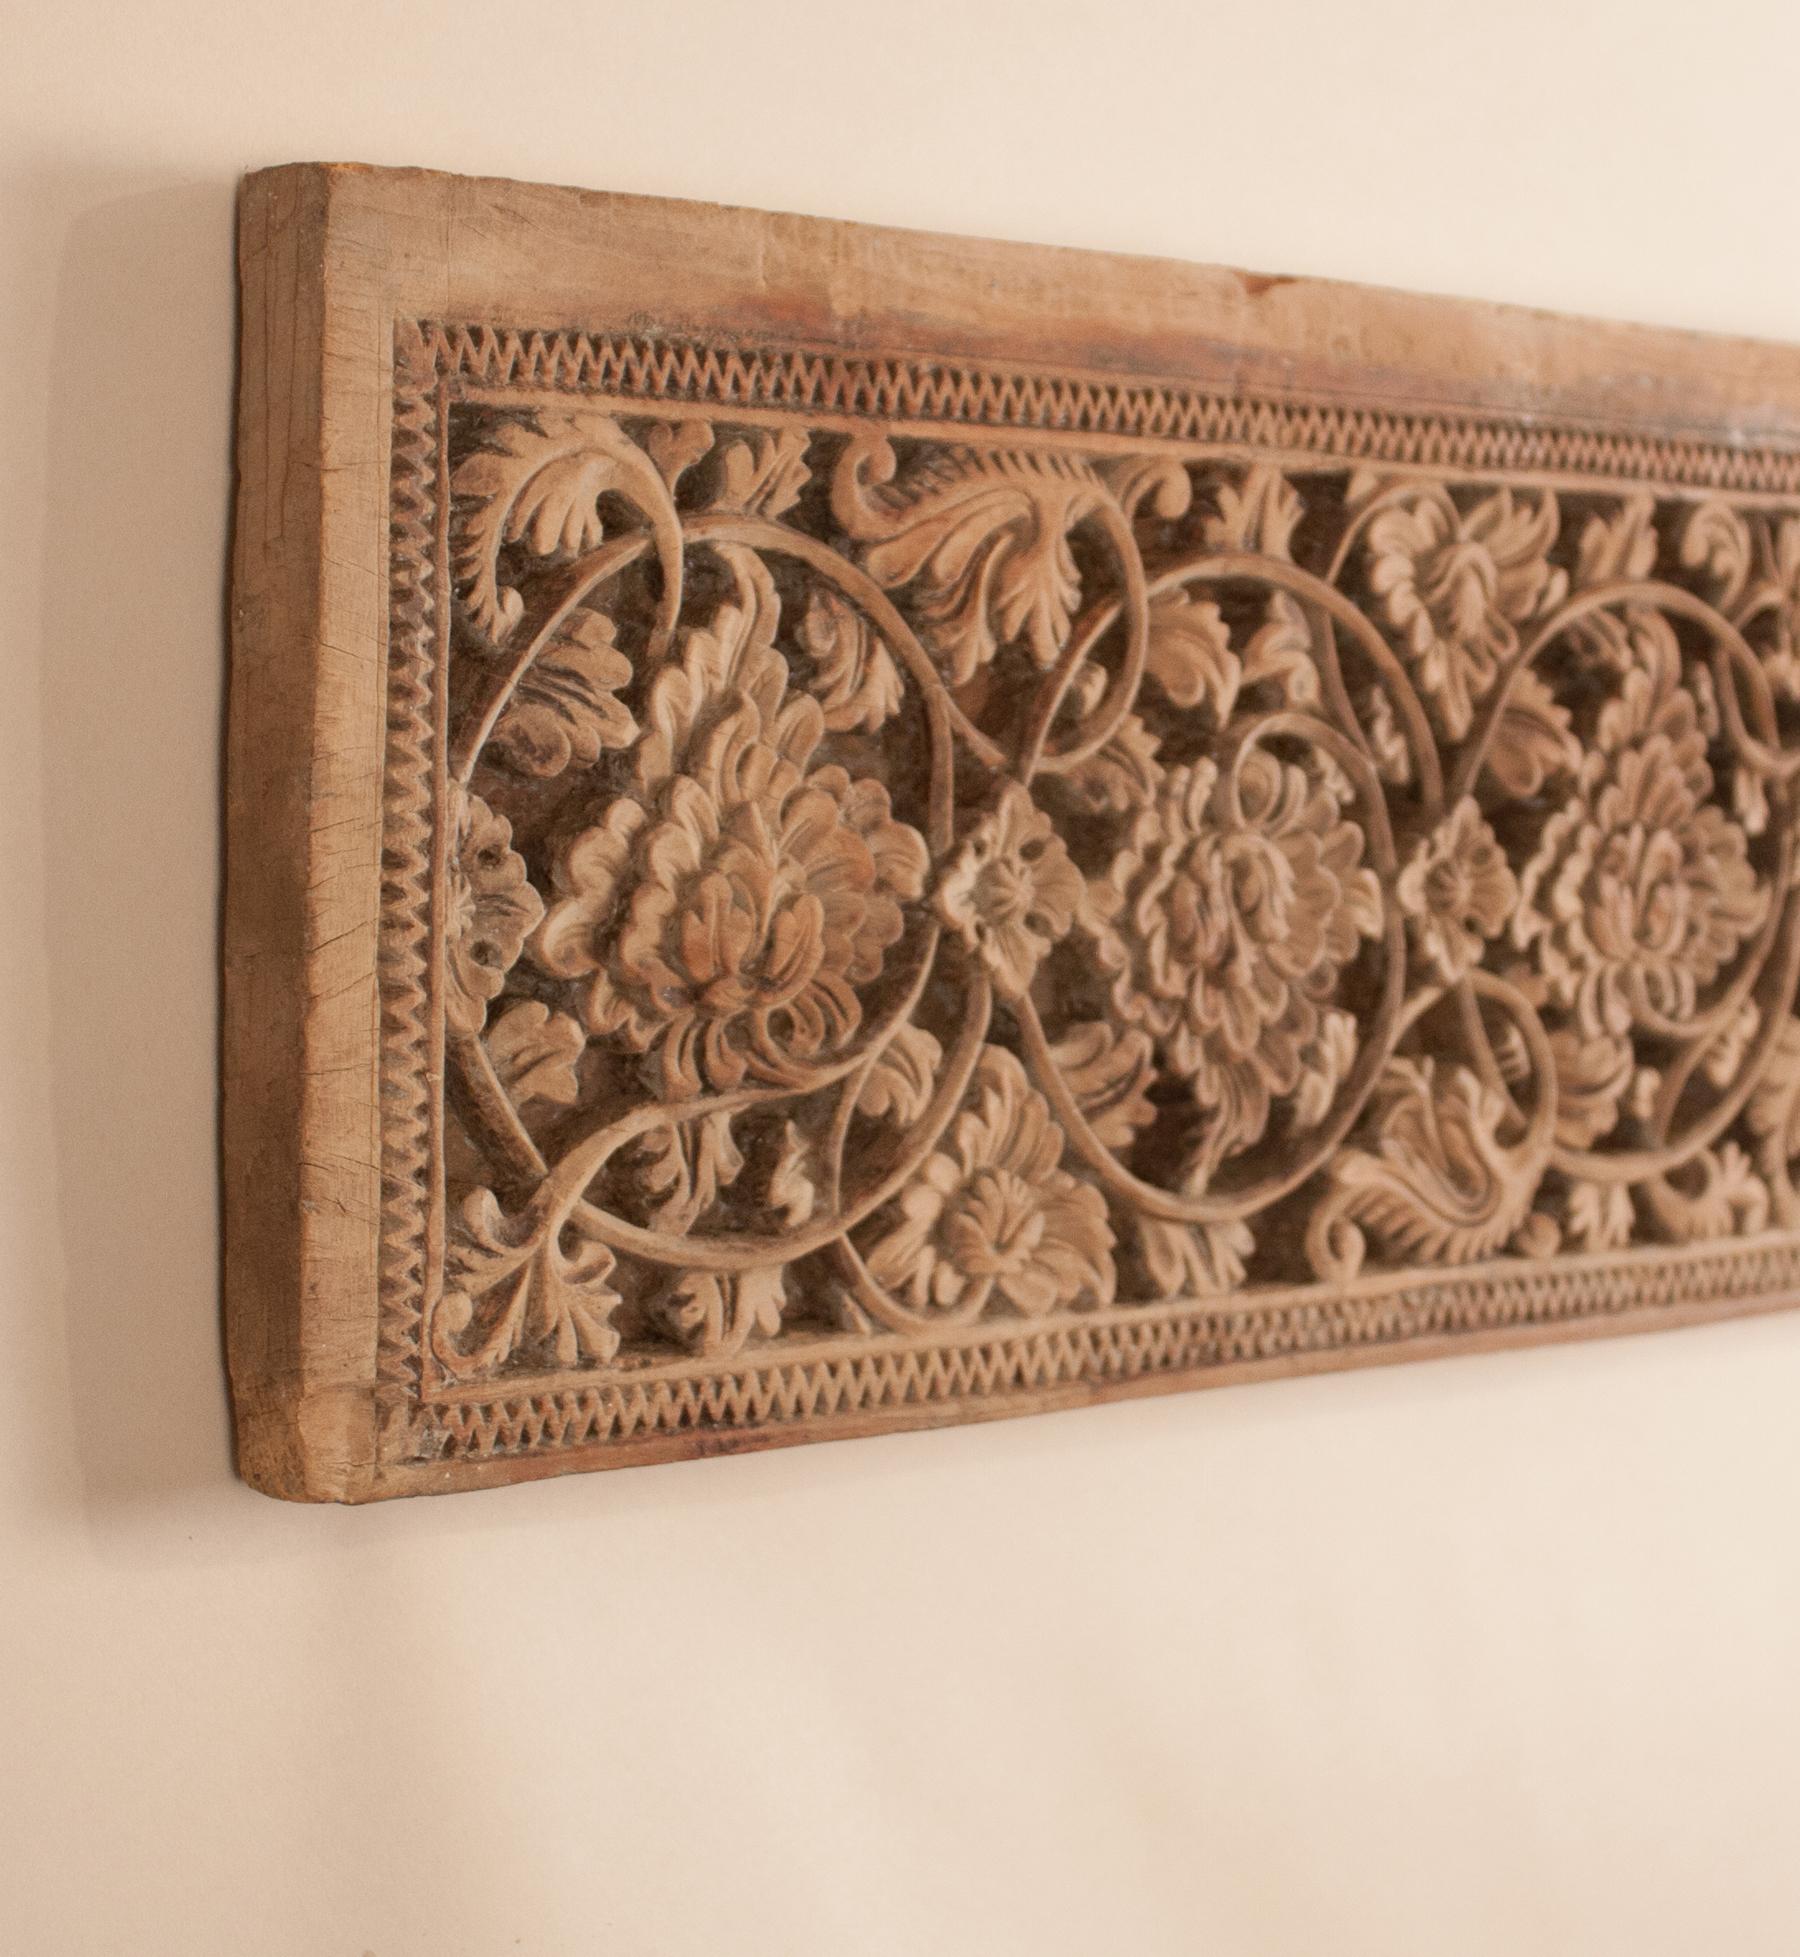 19th Century Carved Teak Wood Mogul Panel from India For Sale 2